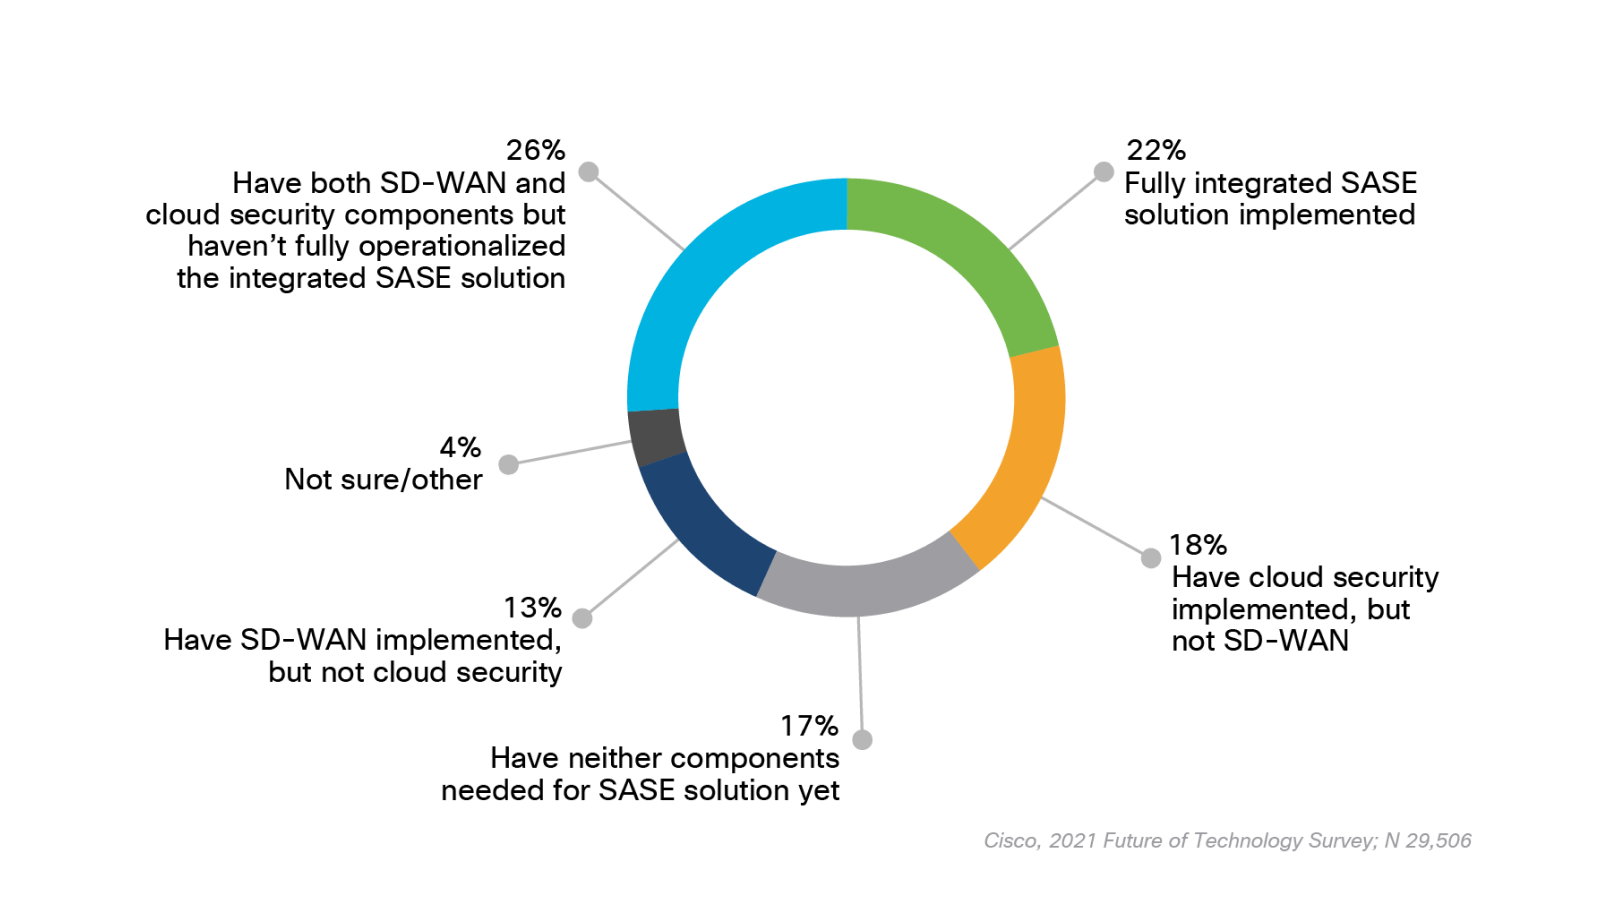 Graph showing percentage of respondents at various stages of SASE journey. 26% have both SD-WAN and Cloud security components but haven’t fully operationalized the integrated SASE solution, 22% fully integrated SASE solution implemented, 18% have Cloud security implemented, but not SD-WAN, 17% have neither components needed for SASE solution yet, 13% have SD-WAN implemented, but not Cloud security, 4% not sure/other.